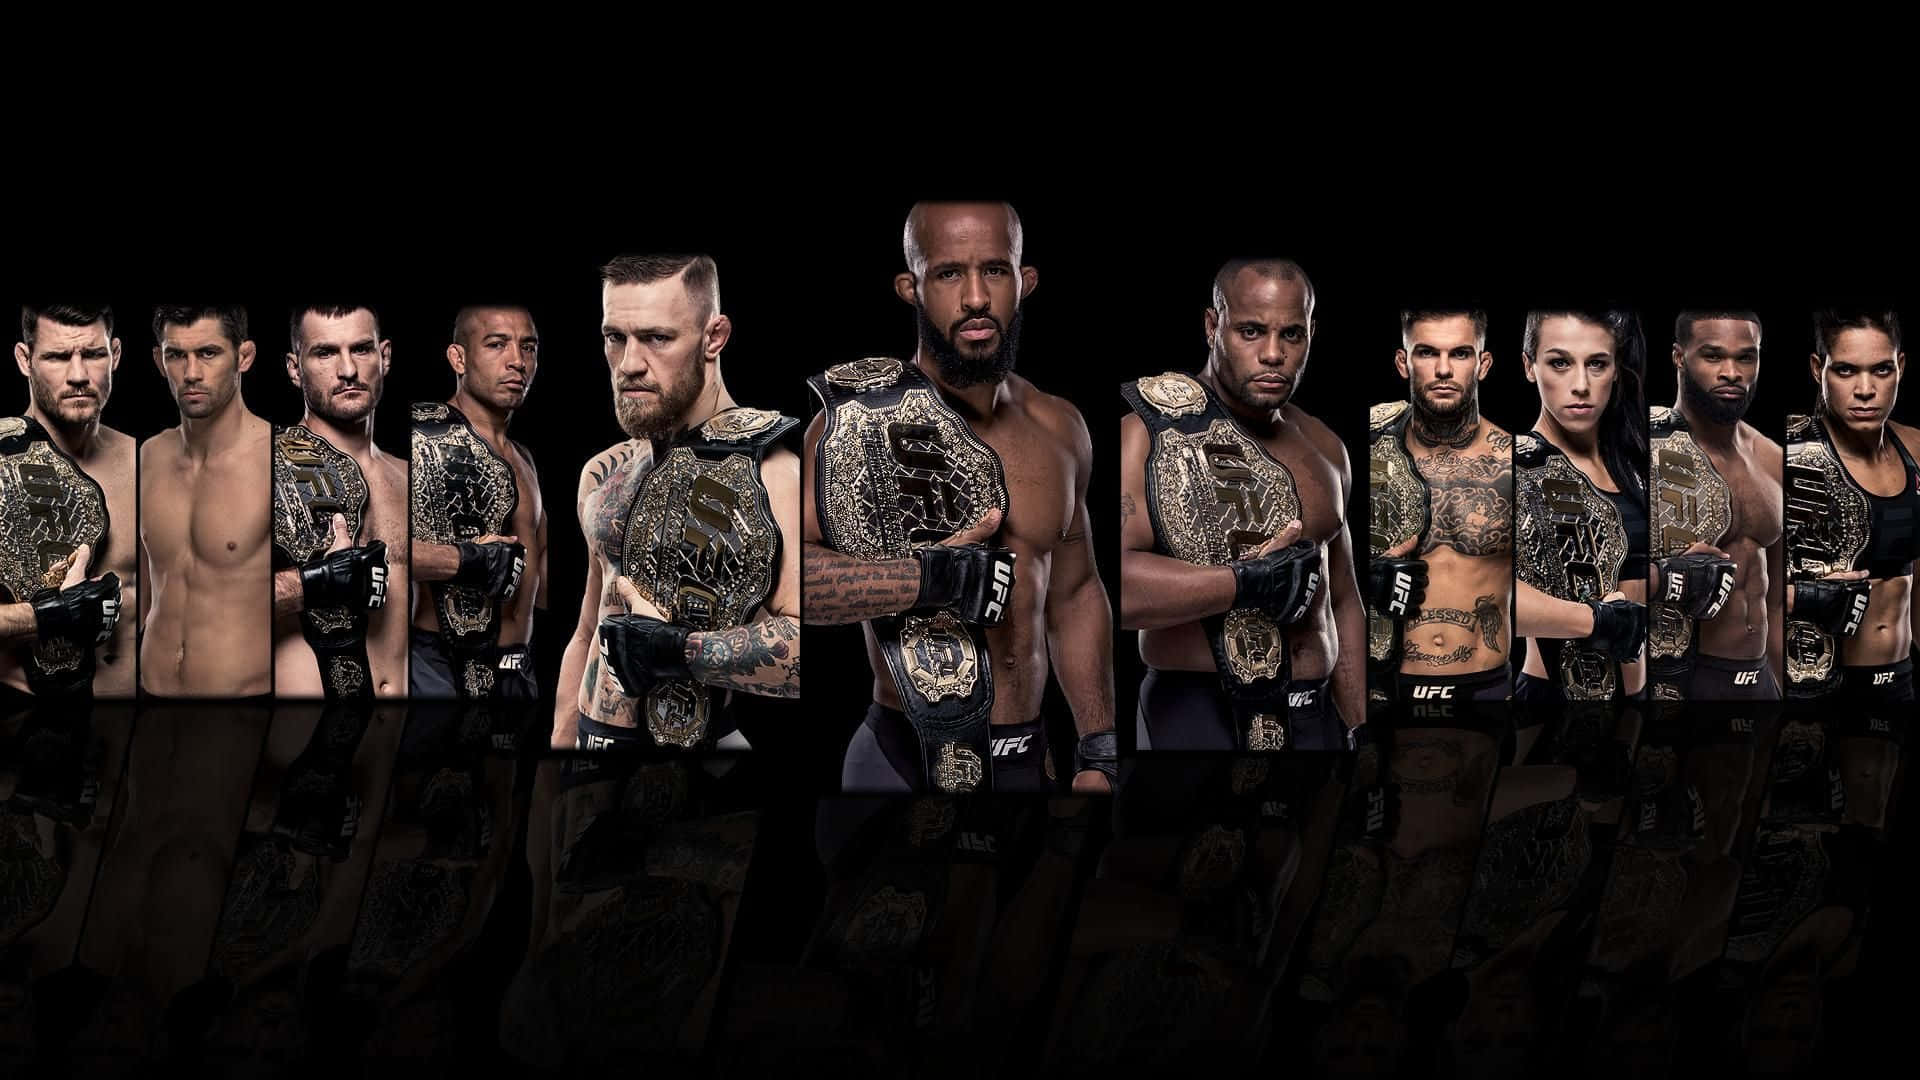 Get Ready for an Action-packed Ufc Event